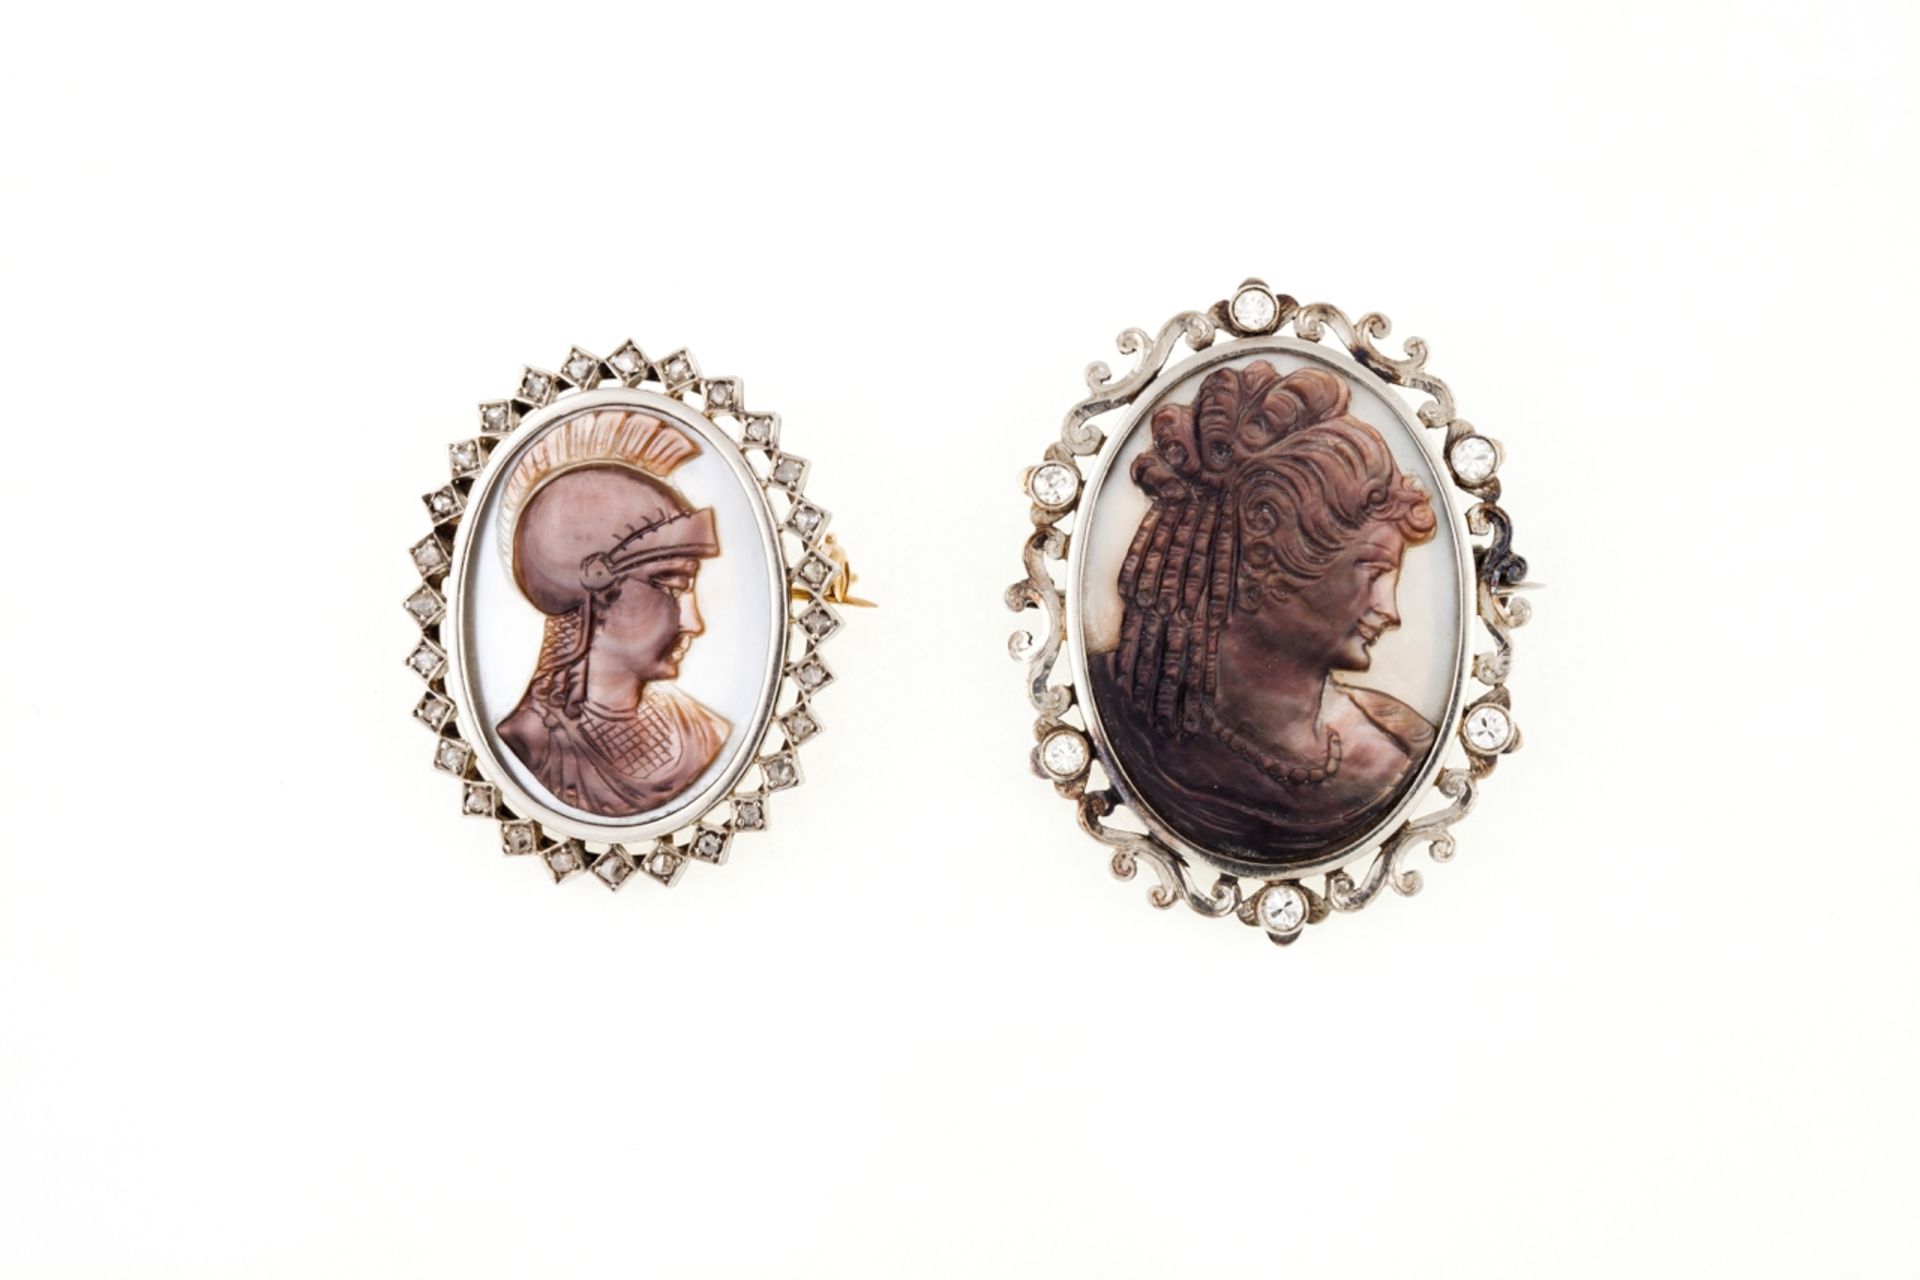 Two diamond and cameo brooches  Both set in gold with mother-of-pearl cameos, frames set with rose c